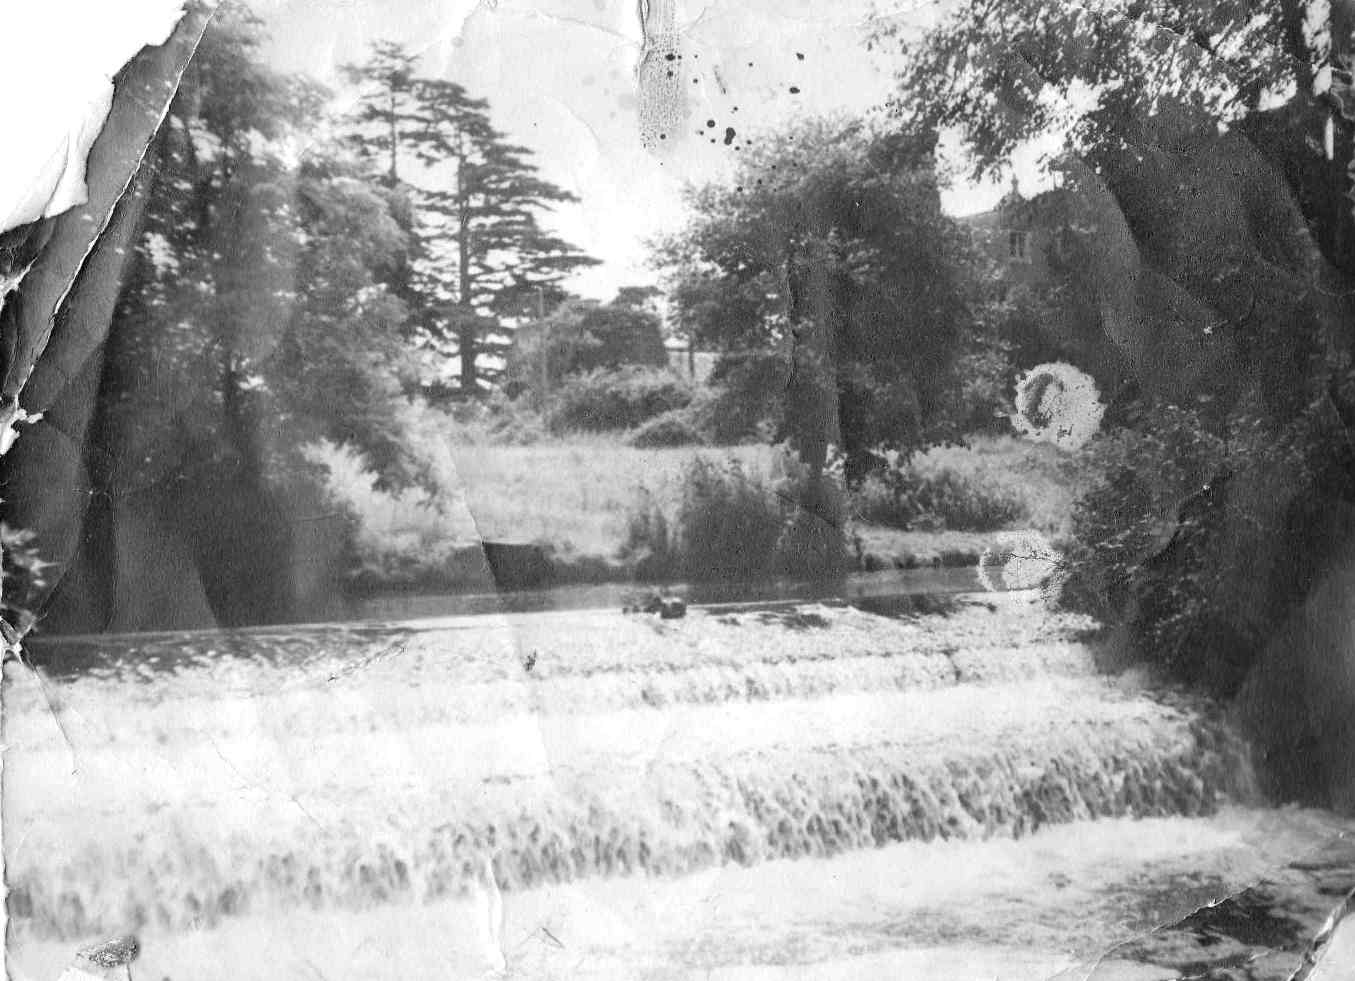 The weir on the River Loddon, behind Arborfield Hall